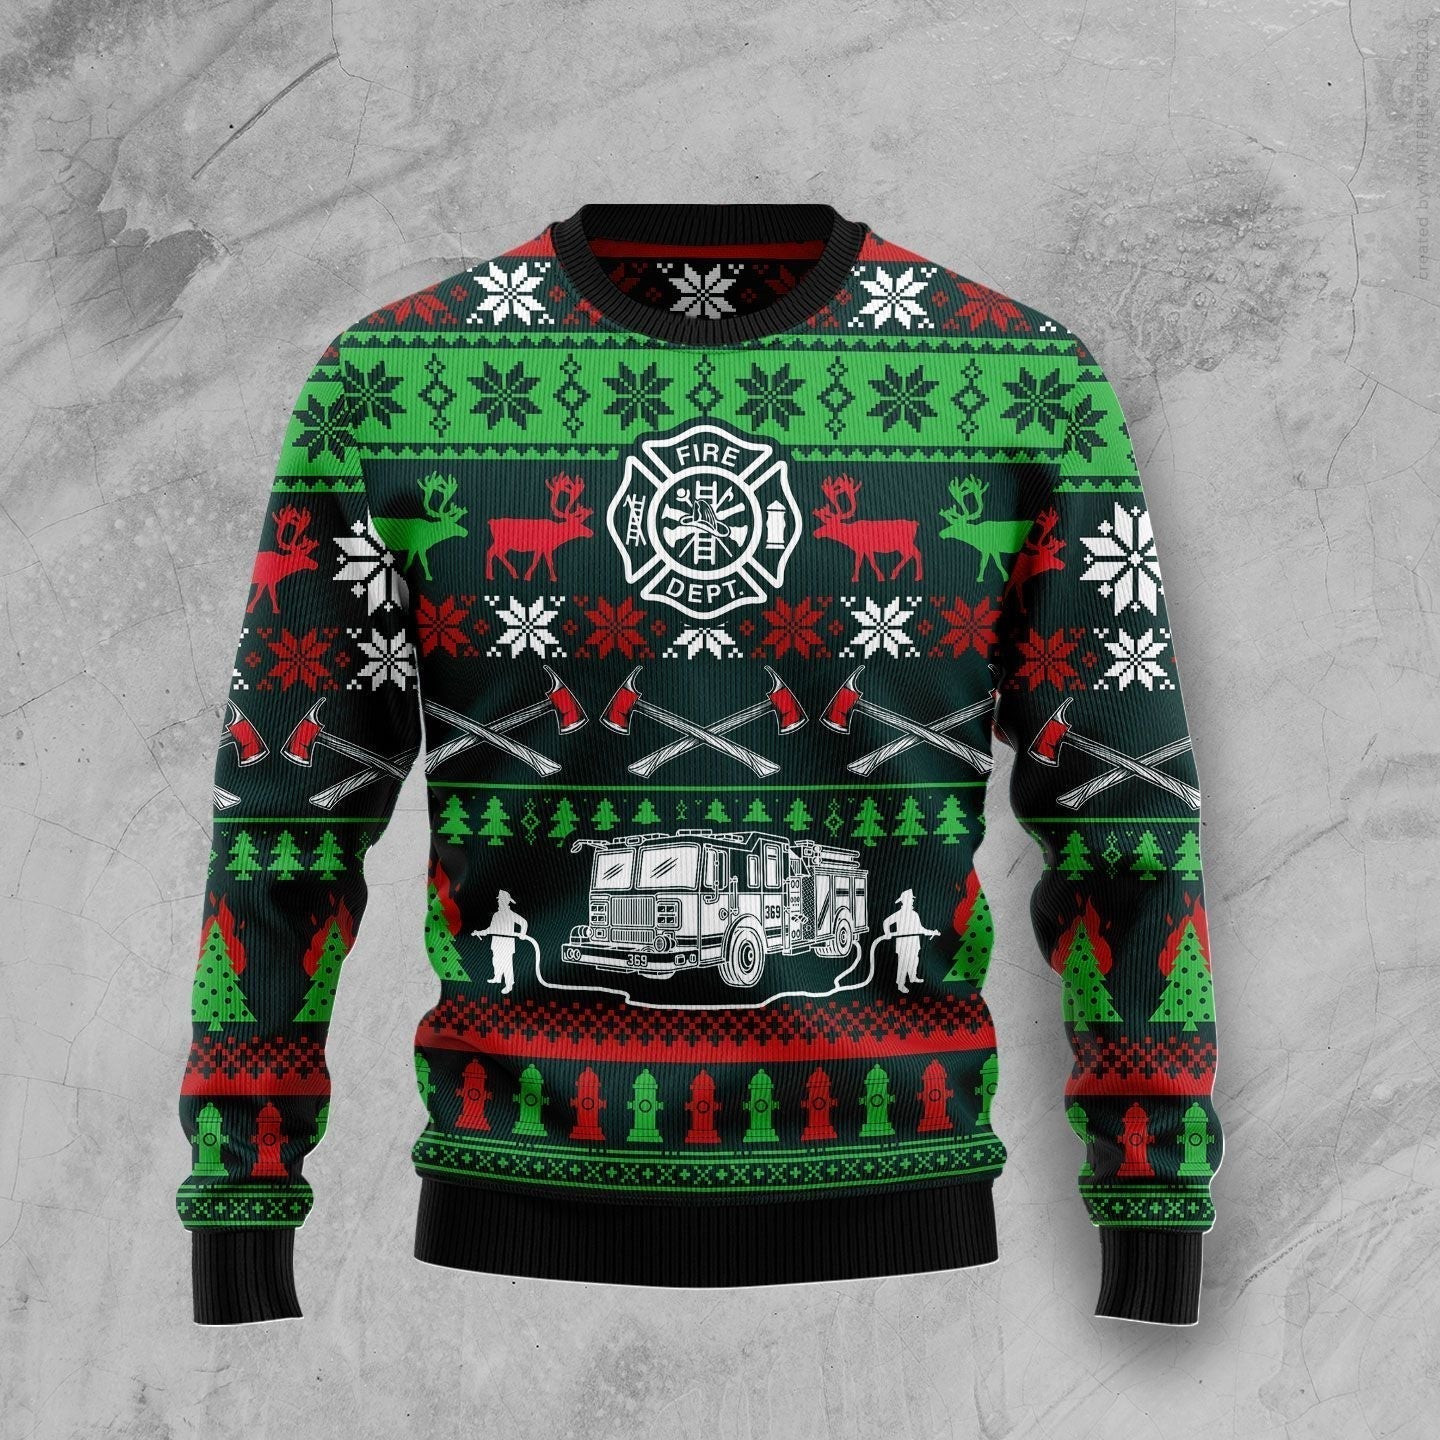 Awesome Firefighter Ugly Christmas Sweater Ugly Sweater For Men Women, Holiday Sweater